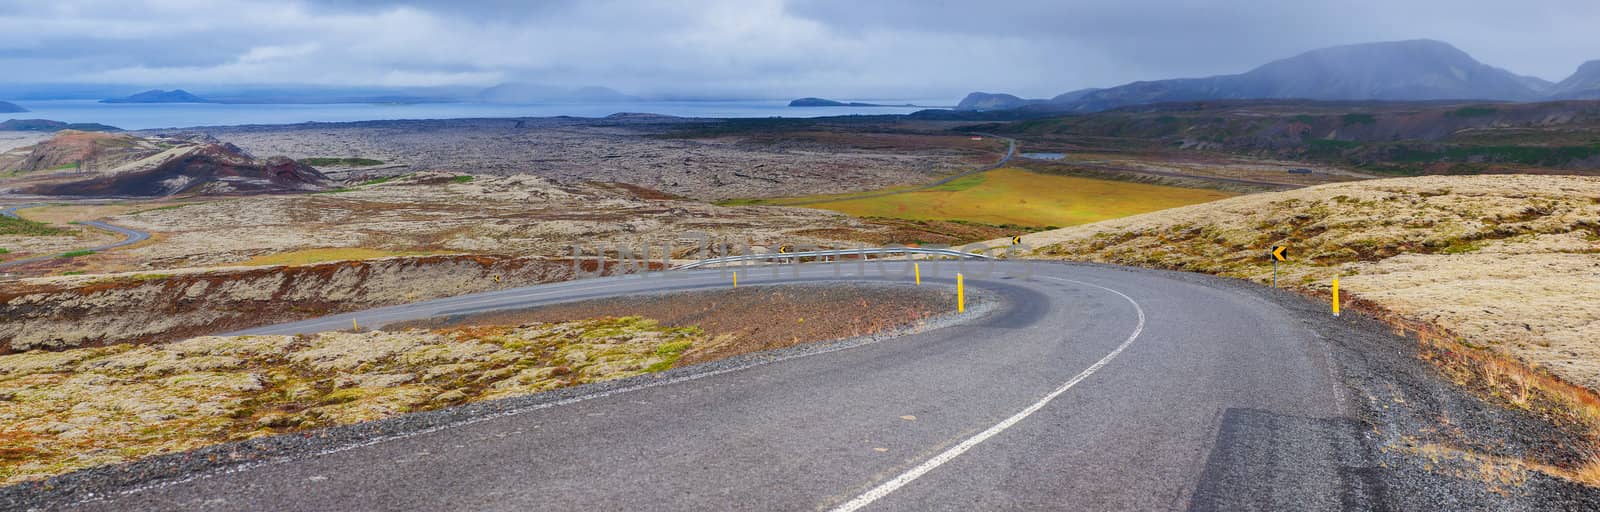 Winding road bends of Thingvellir - famous area in Iceland. Panorama